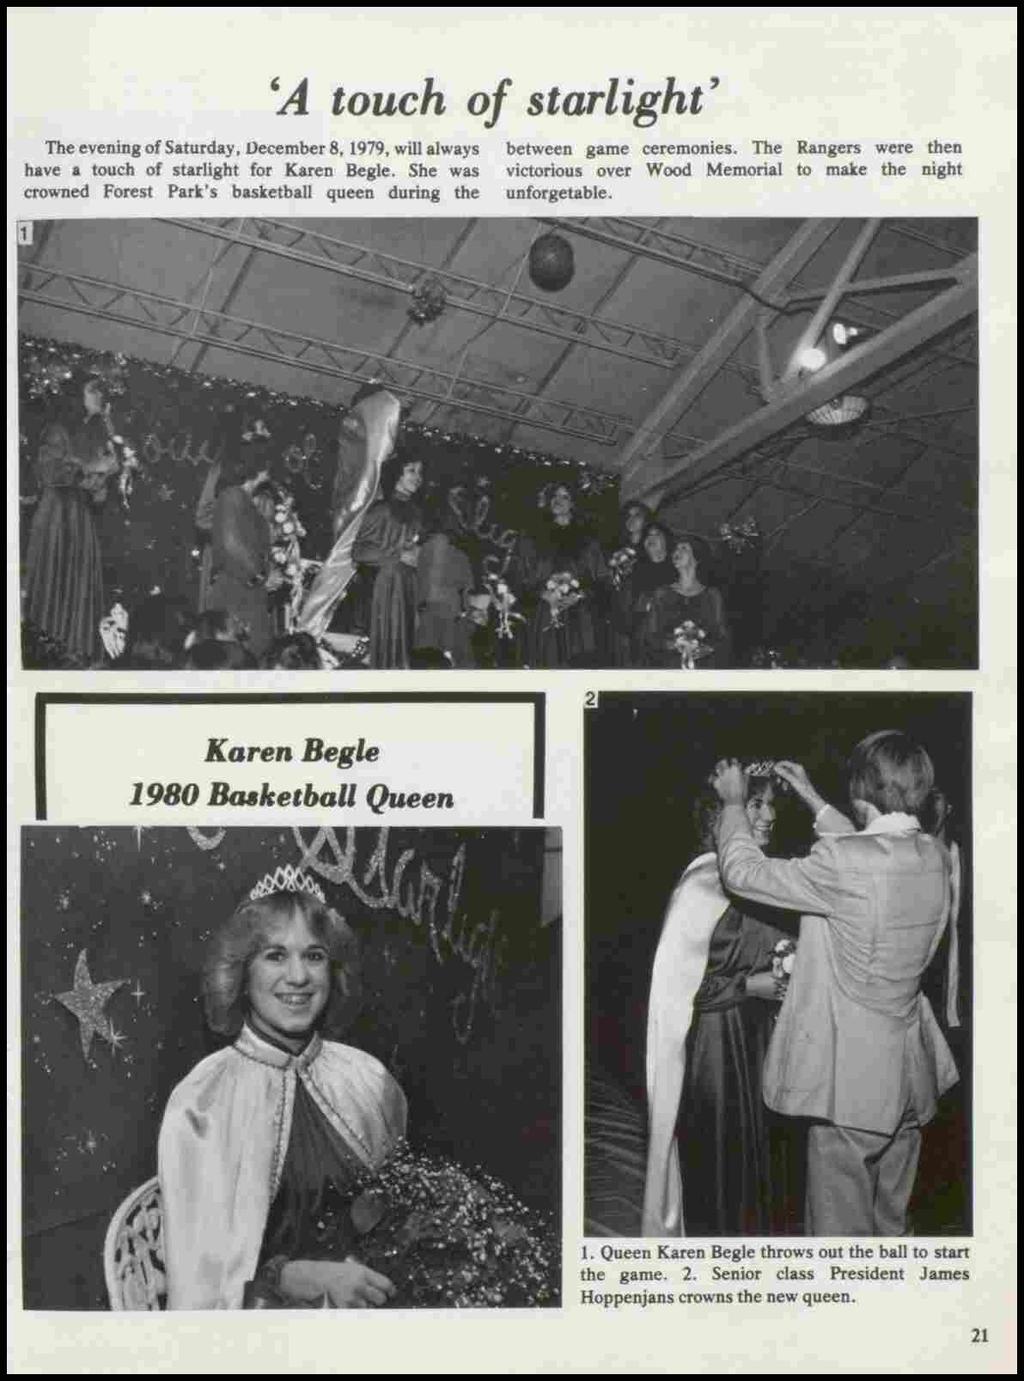 The evening of Saturday, December 8, 1979, will always have a touch of starlight for Karen Begle.